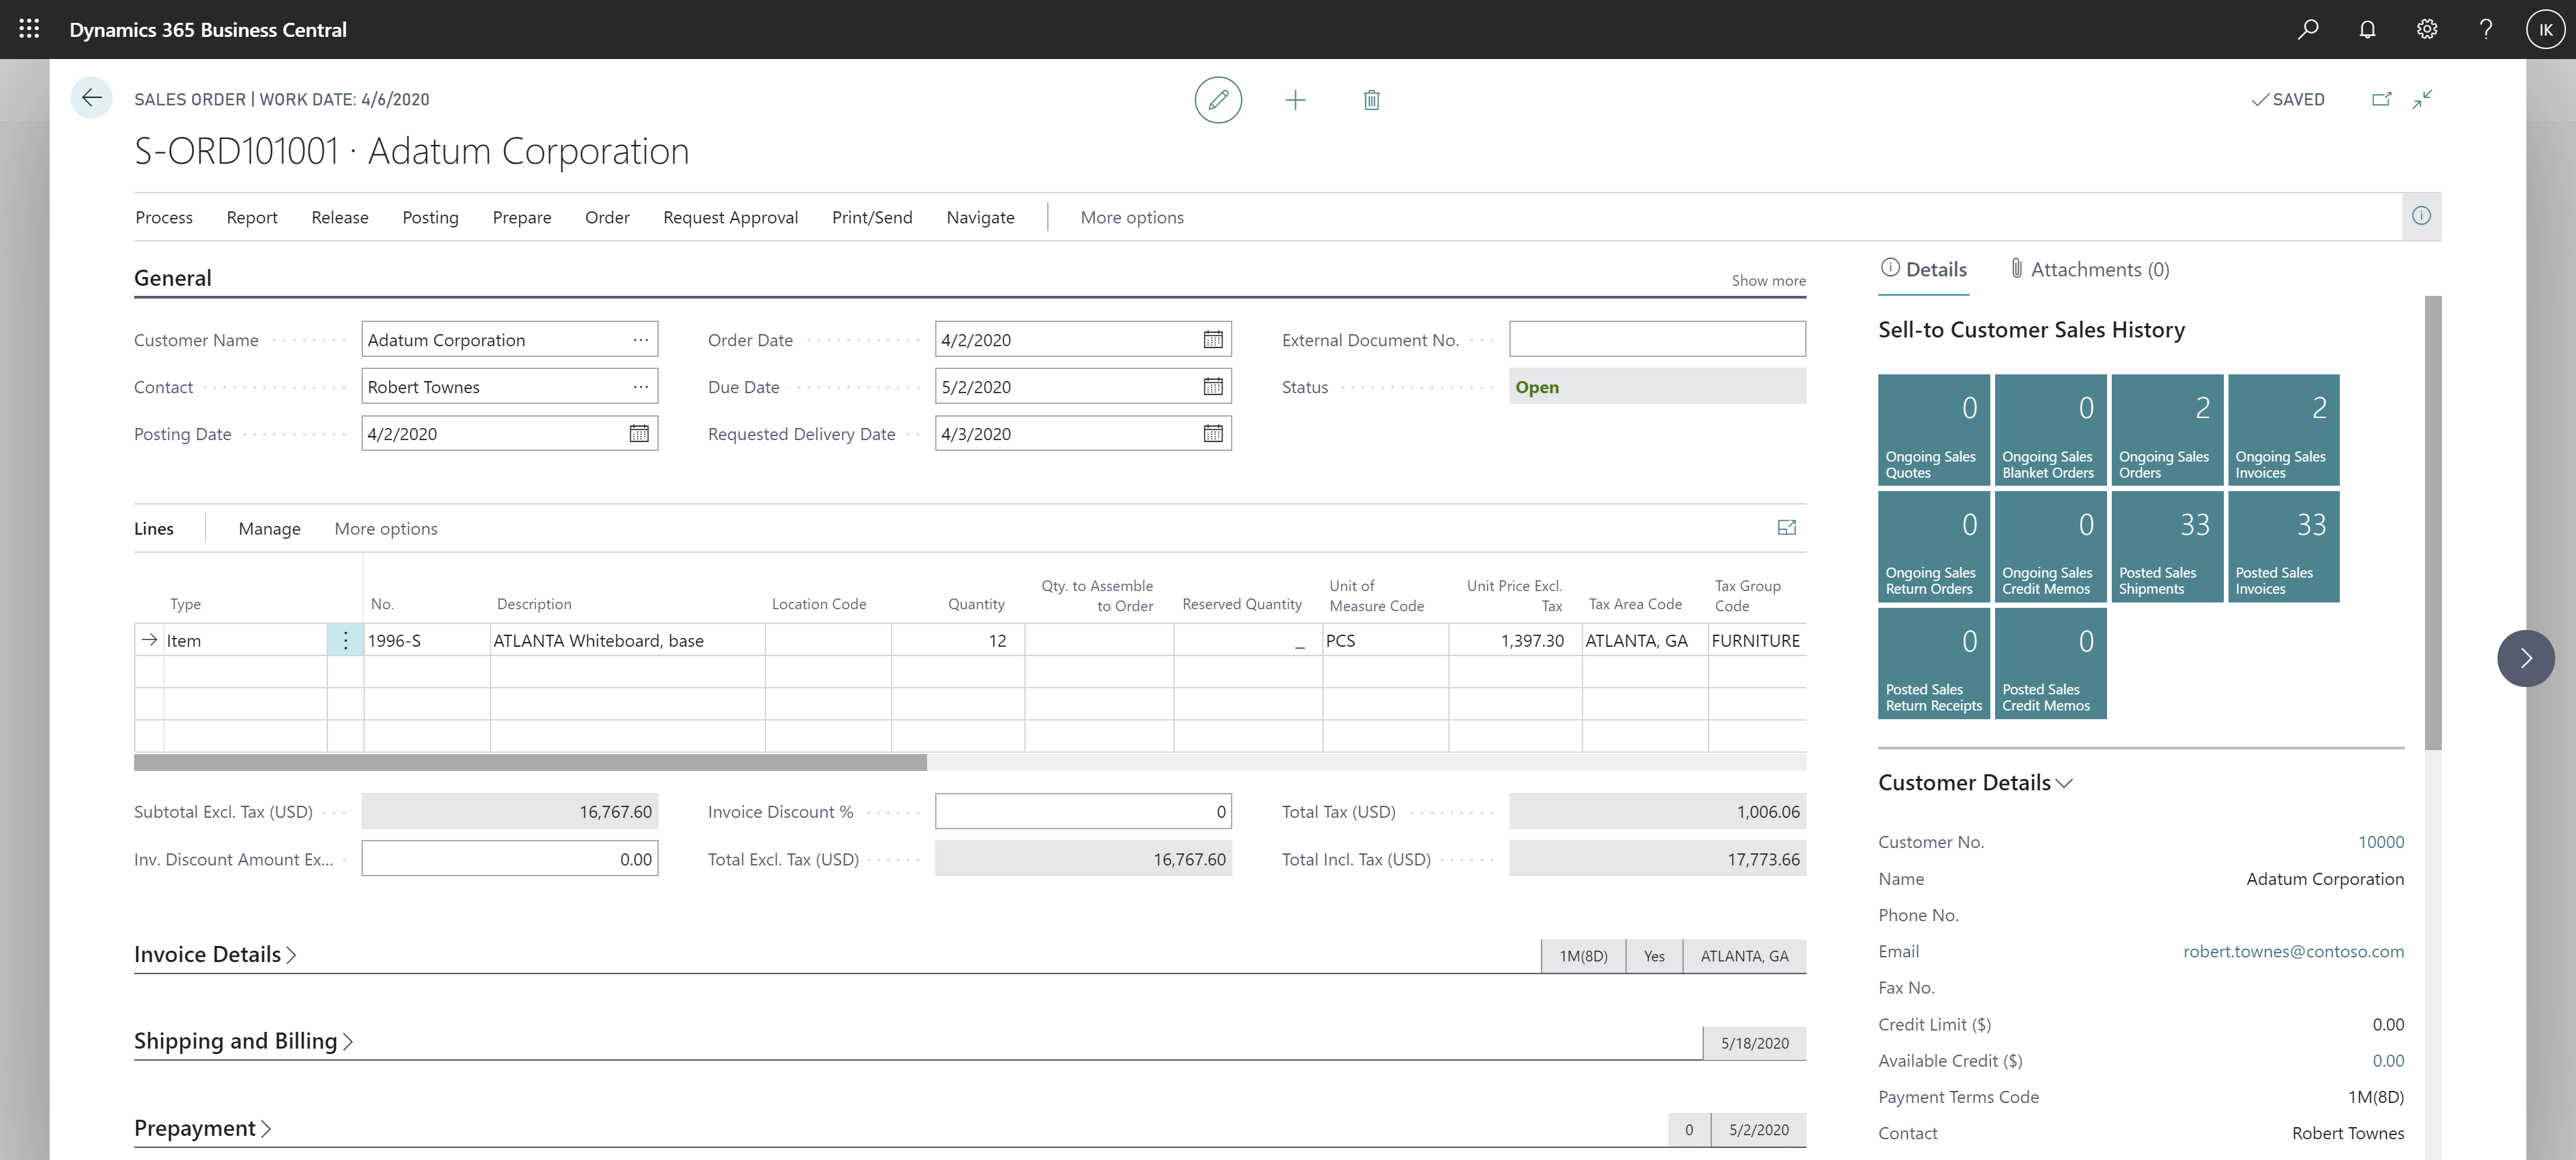 A view of promoted and conditionally formatted Sales Order Status field